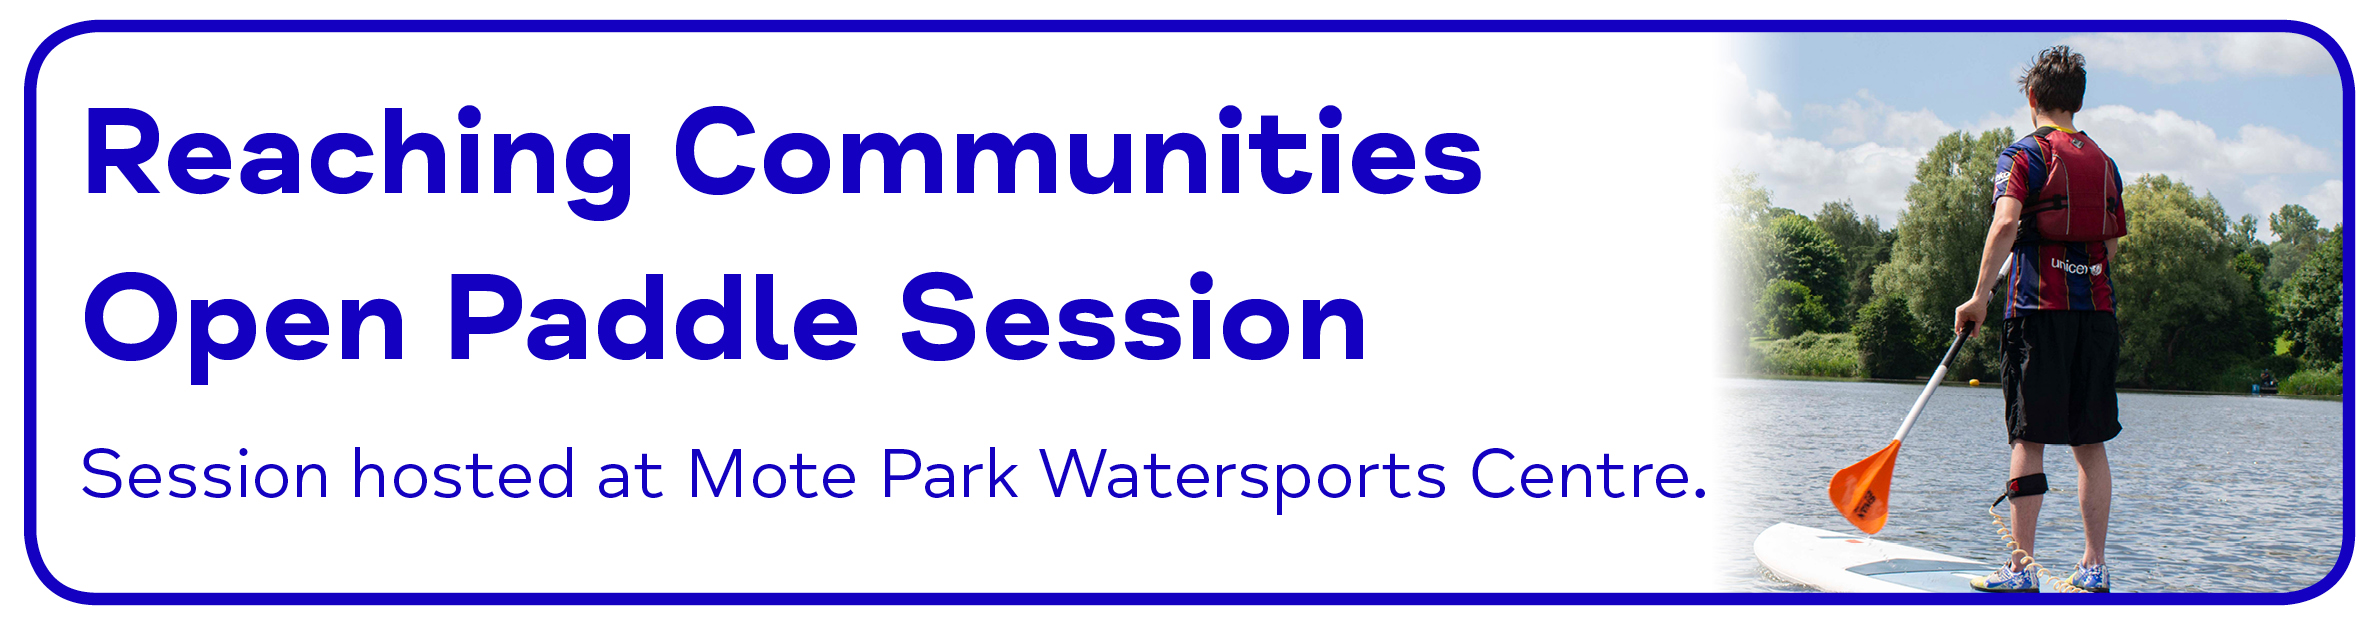 Reaching Communities Open Paddle Session Session hosted at Mote Park Watersports Centre.